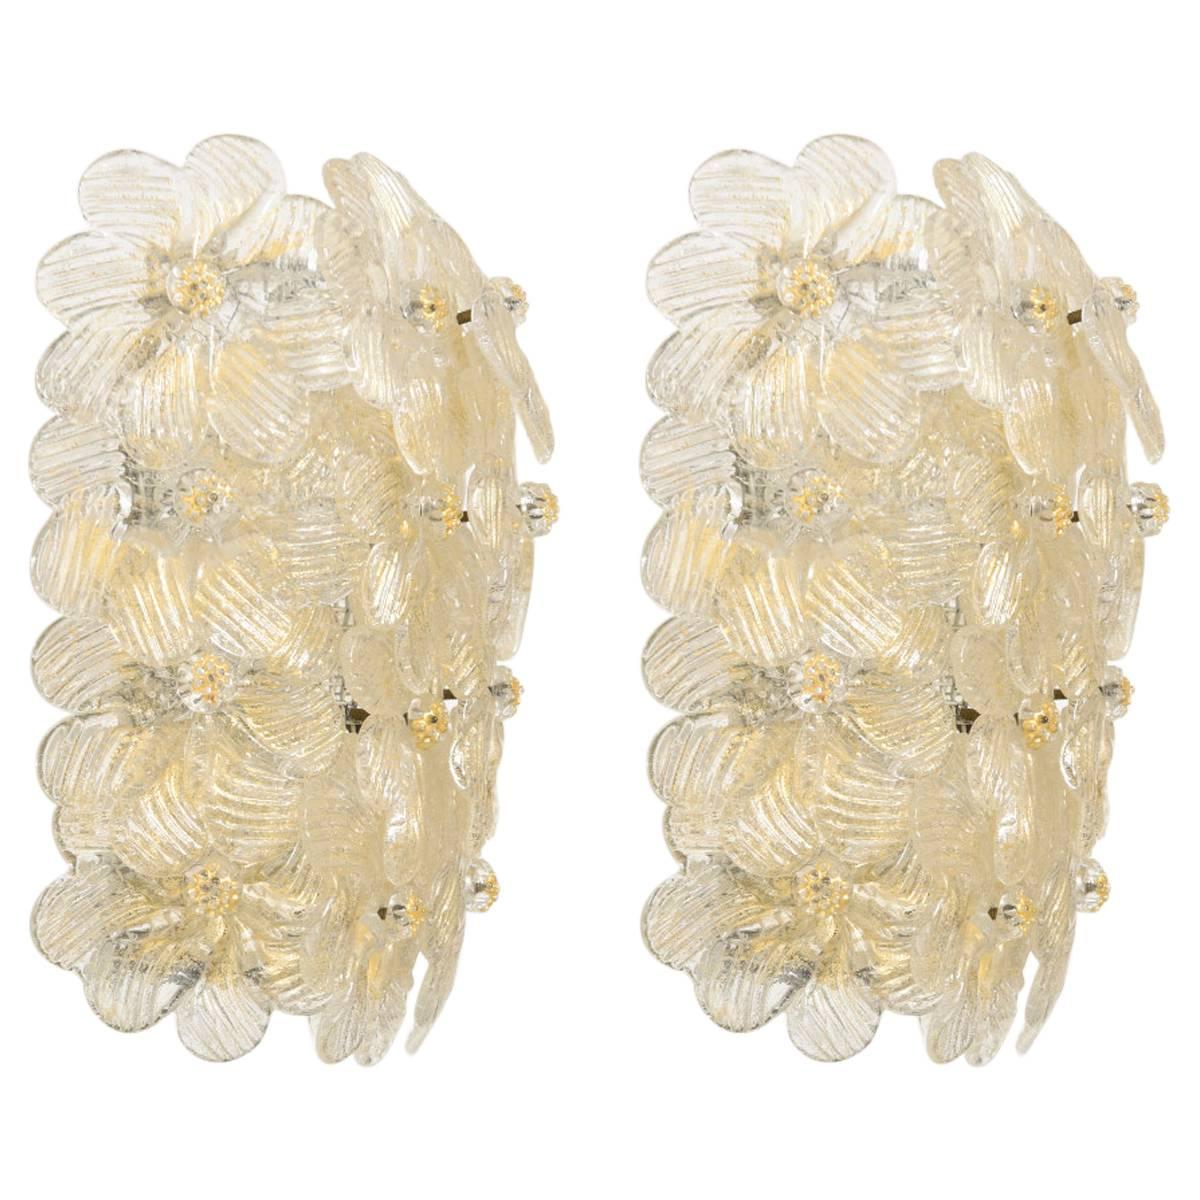 Pair of Barovier & Toso Flower Sconces